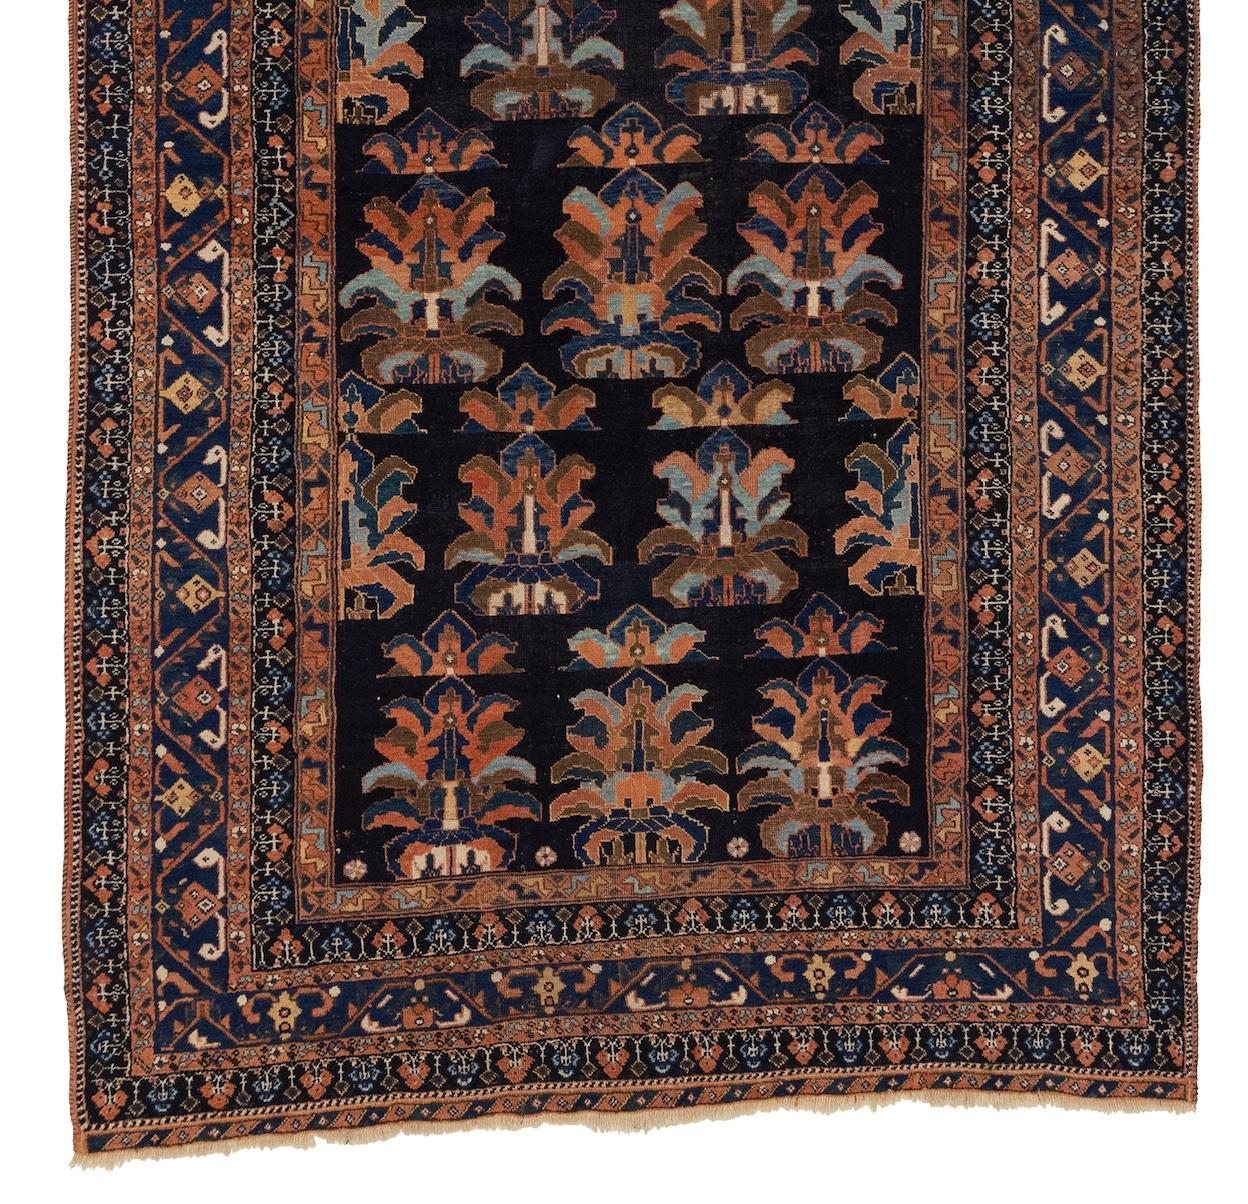 Afshar rugs are a type of handwoven rug that originated from the Afshar tribe, a nomadic group from Iran. Antique Afshar rugs are highly sought for their symbols, motifs, vibrant colors, and exceptional durability.

These rugs are known for their